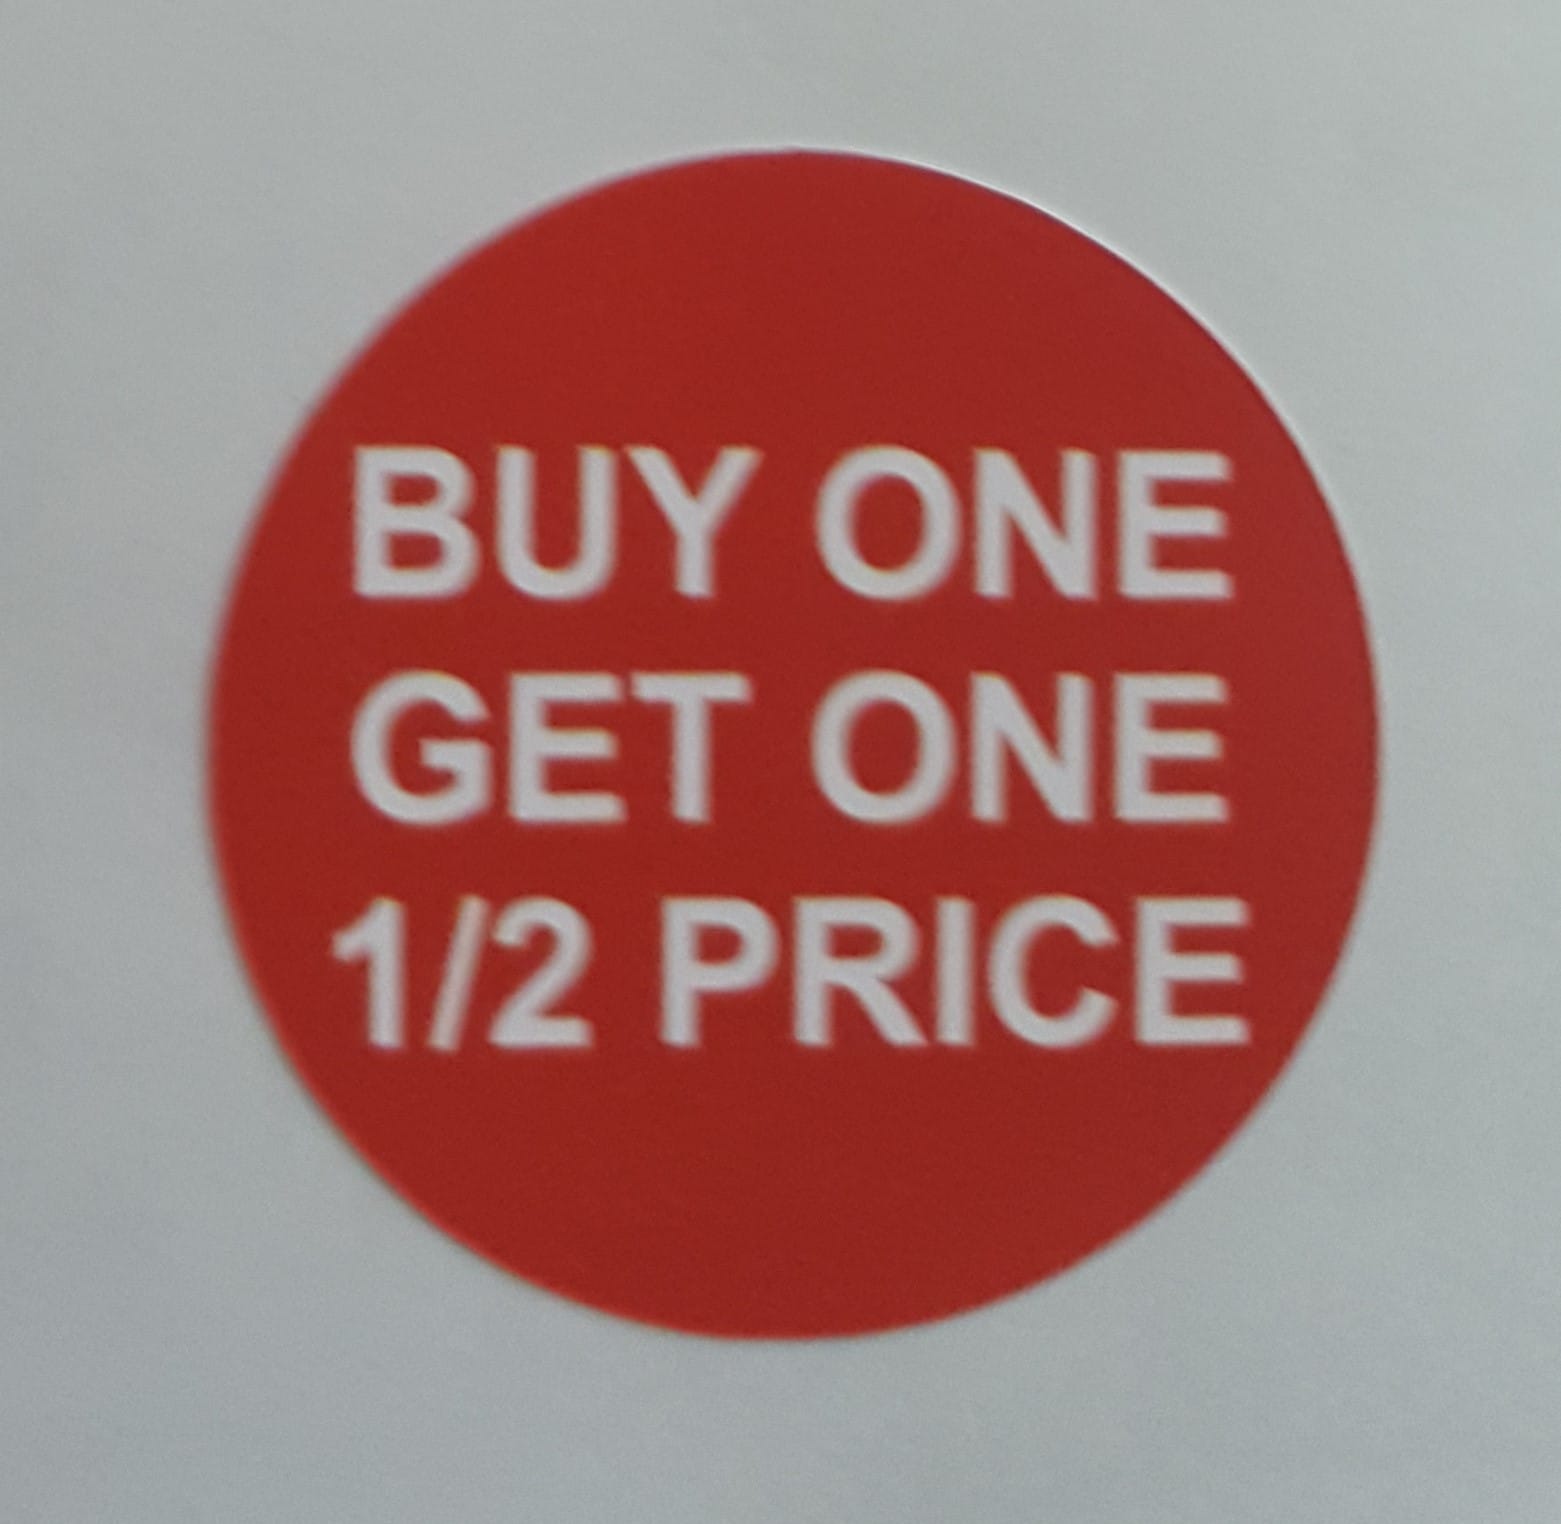 200 Price Stickers Buy One Get One Half Price Stickers 20mm